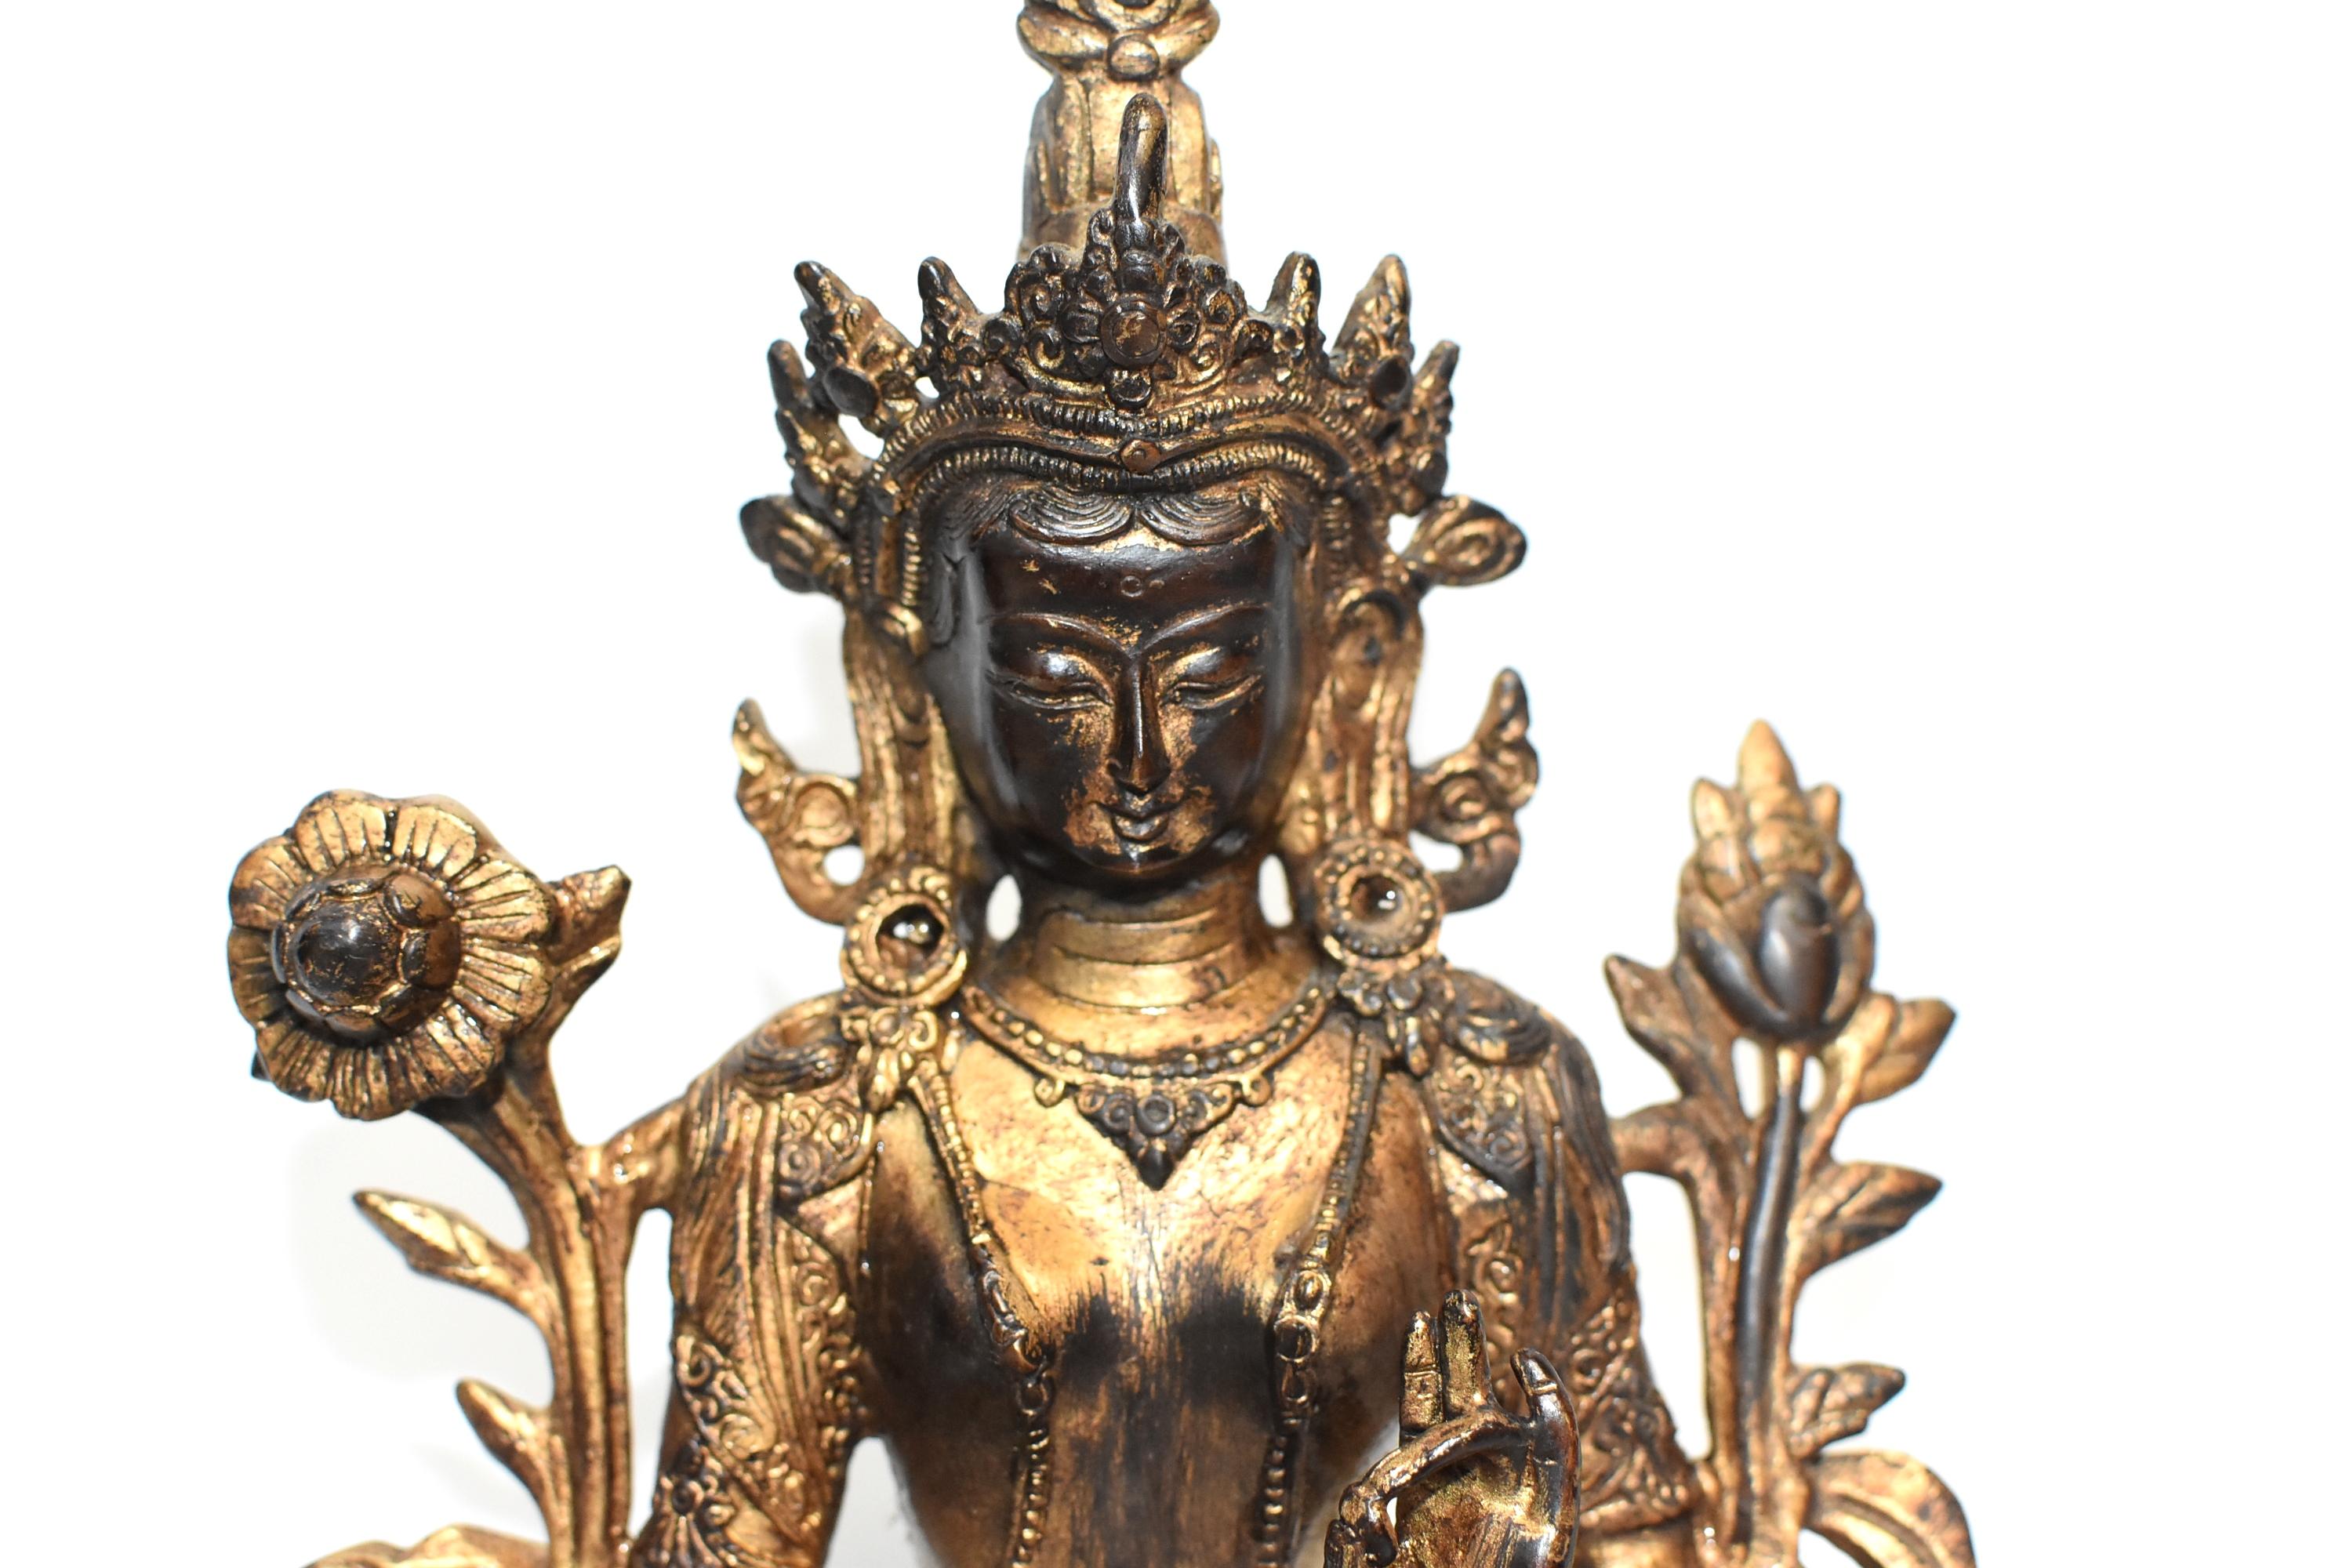 A beautiful, large, gilded Tibetan Tara statue. The Green Tara is seated on a lotus throne, wears a highly decorated crown and is decorated with sashes and flowers. Her body is draped with lariats of pearls, her right foot extends over the boundary